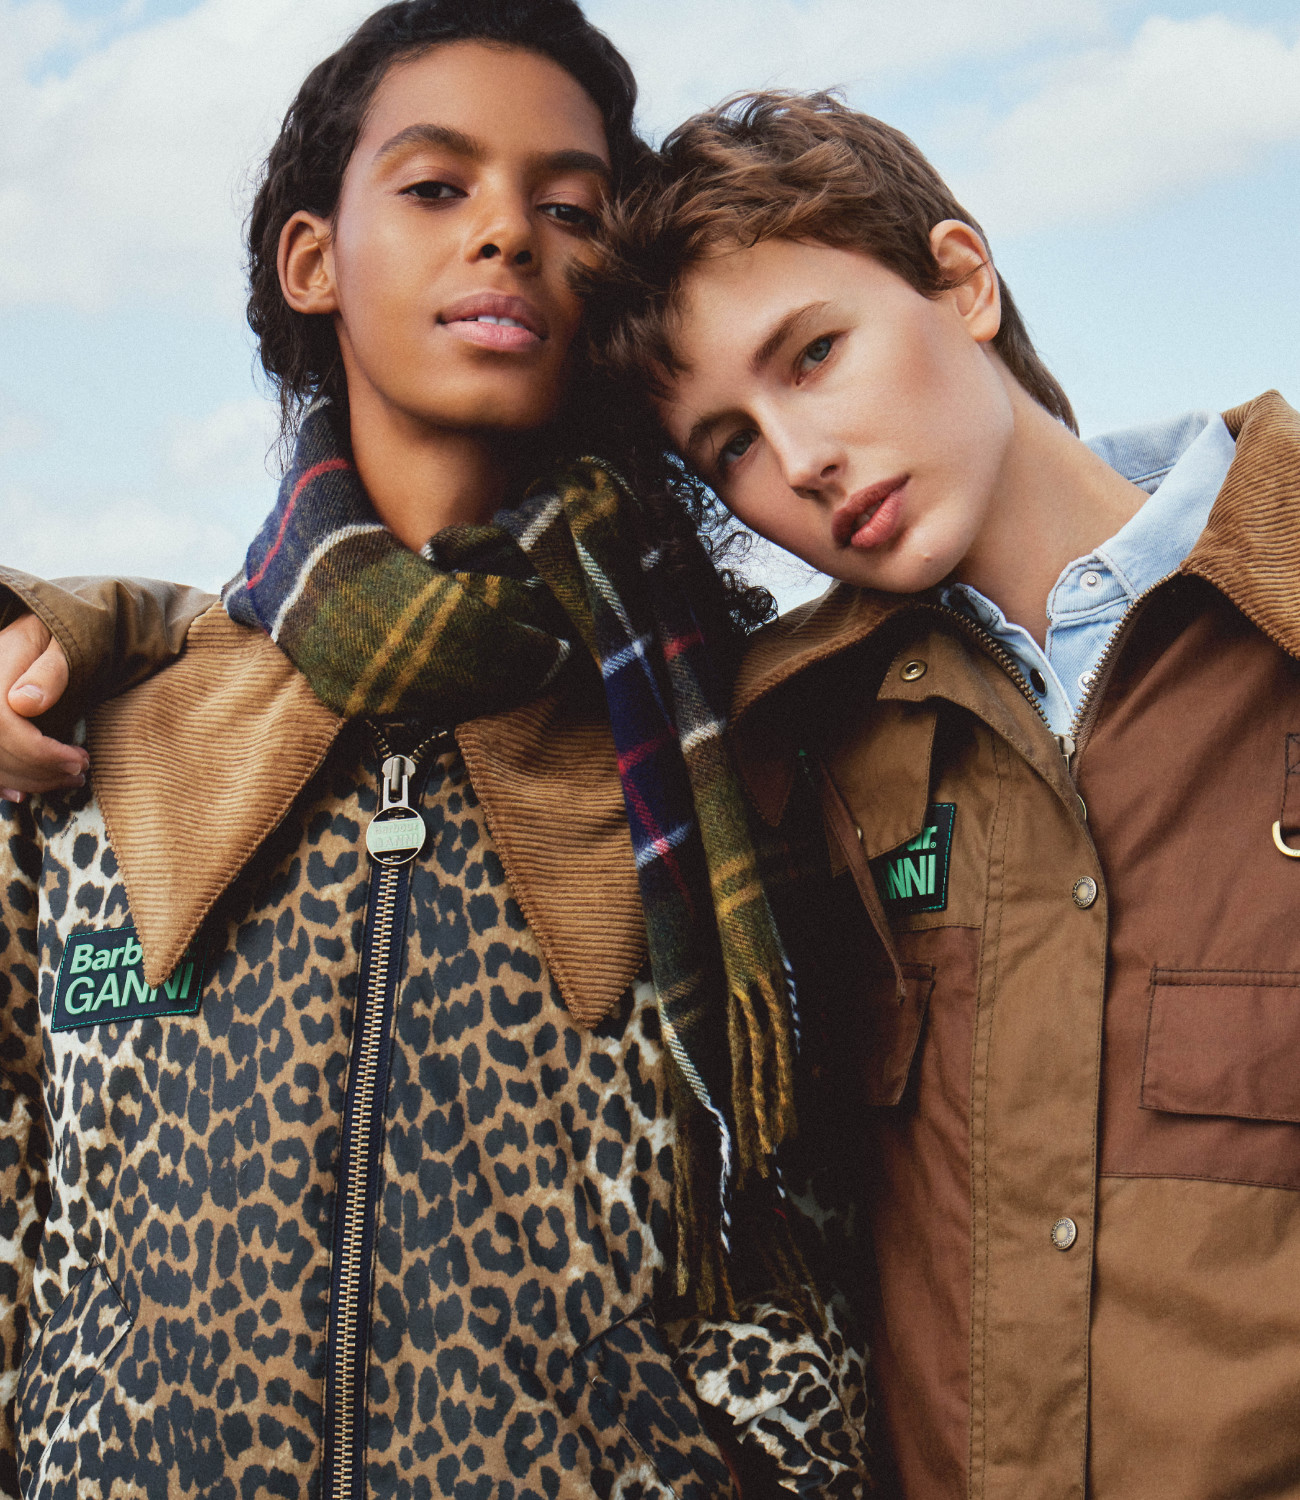 GANNI & Barbour are collaborating for Fall/Winter 2023.